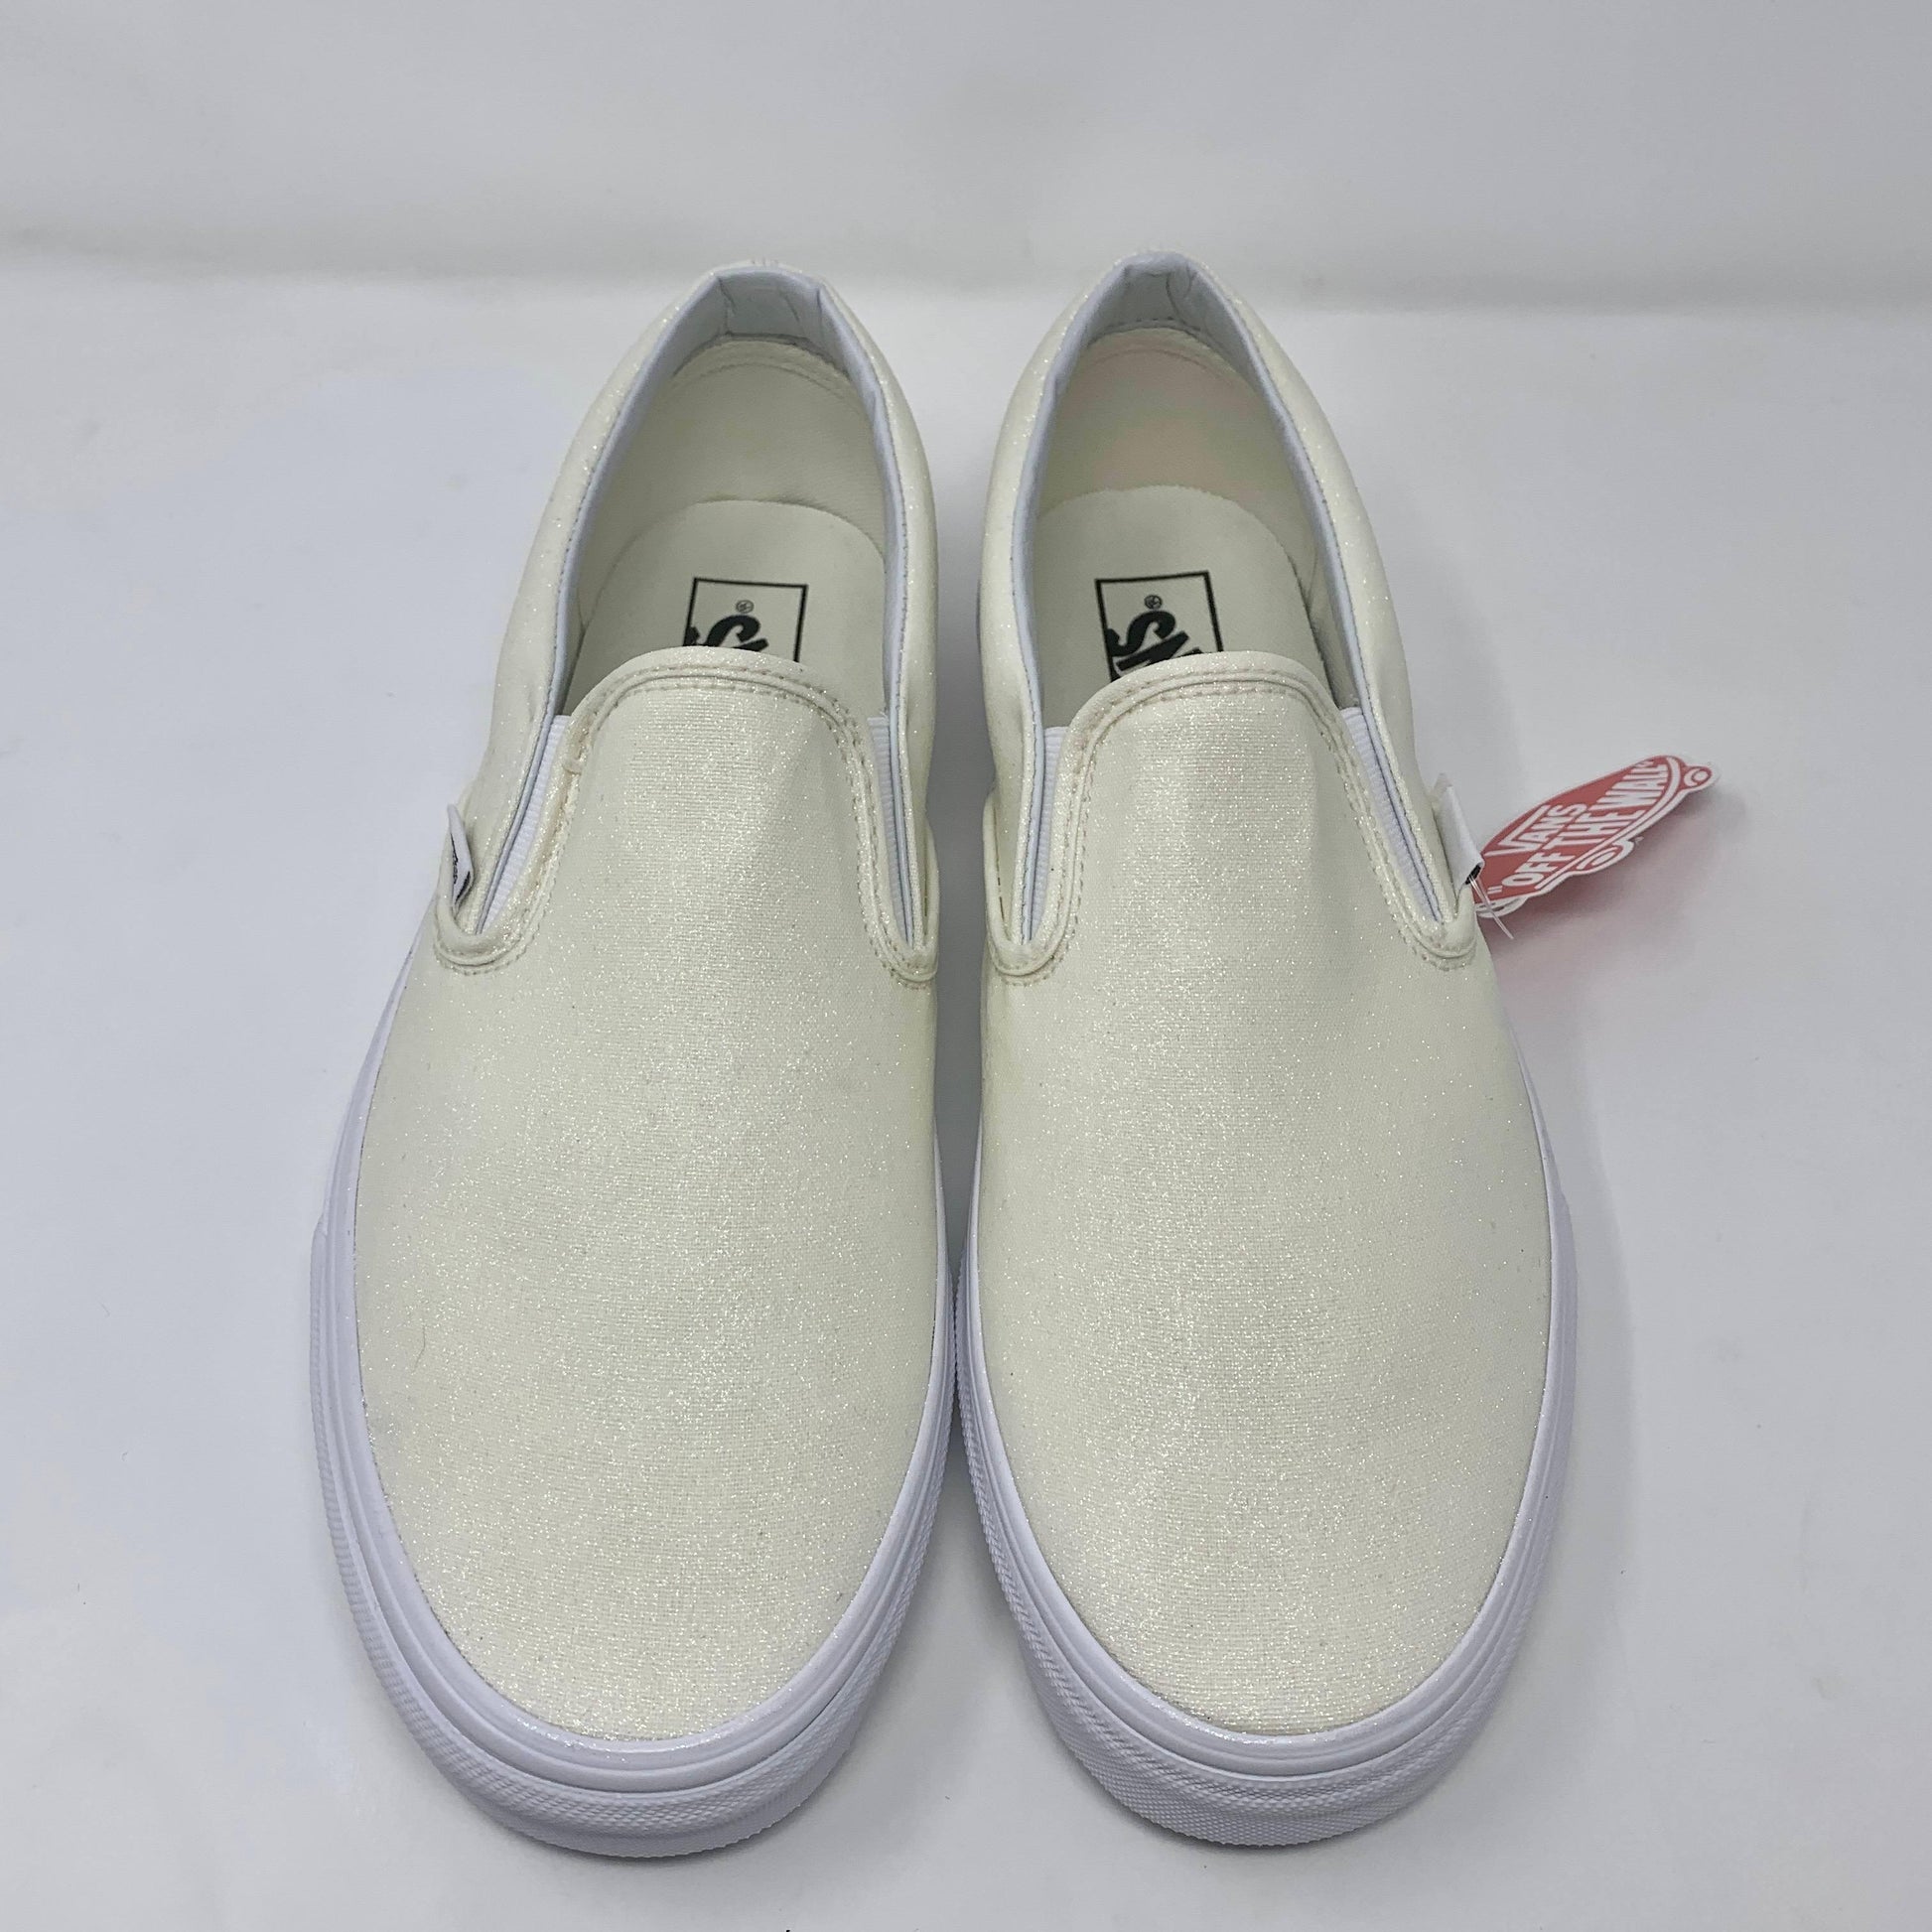 Ivory Glitter Shoes - ButterMakesMeHappy